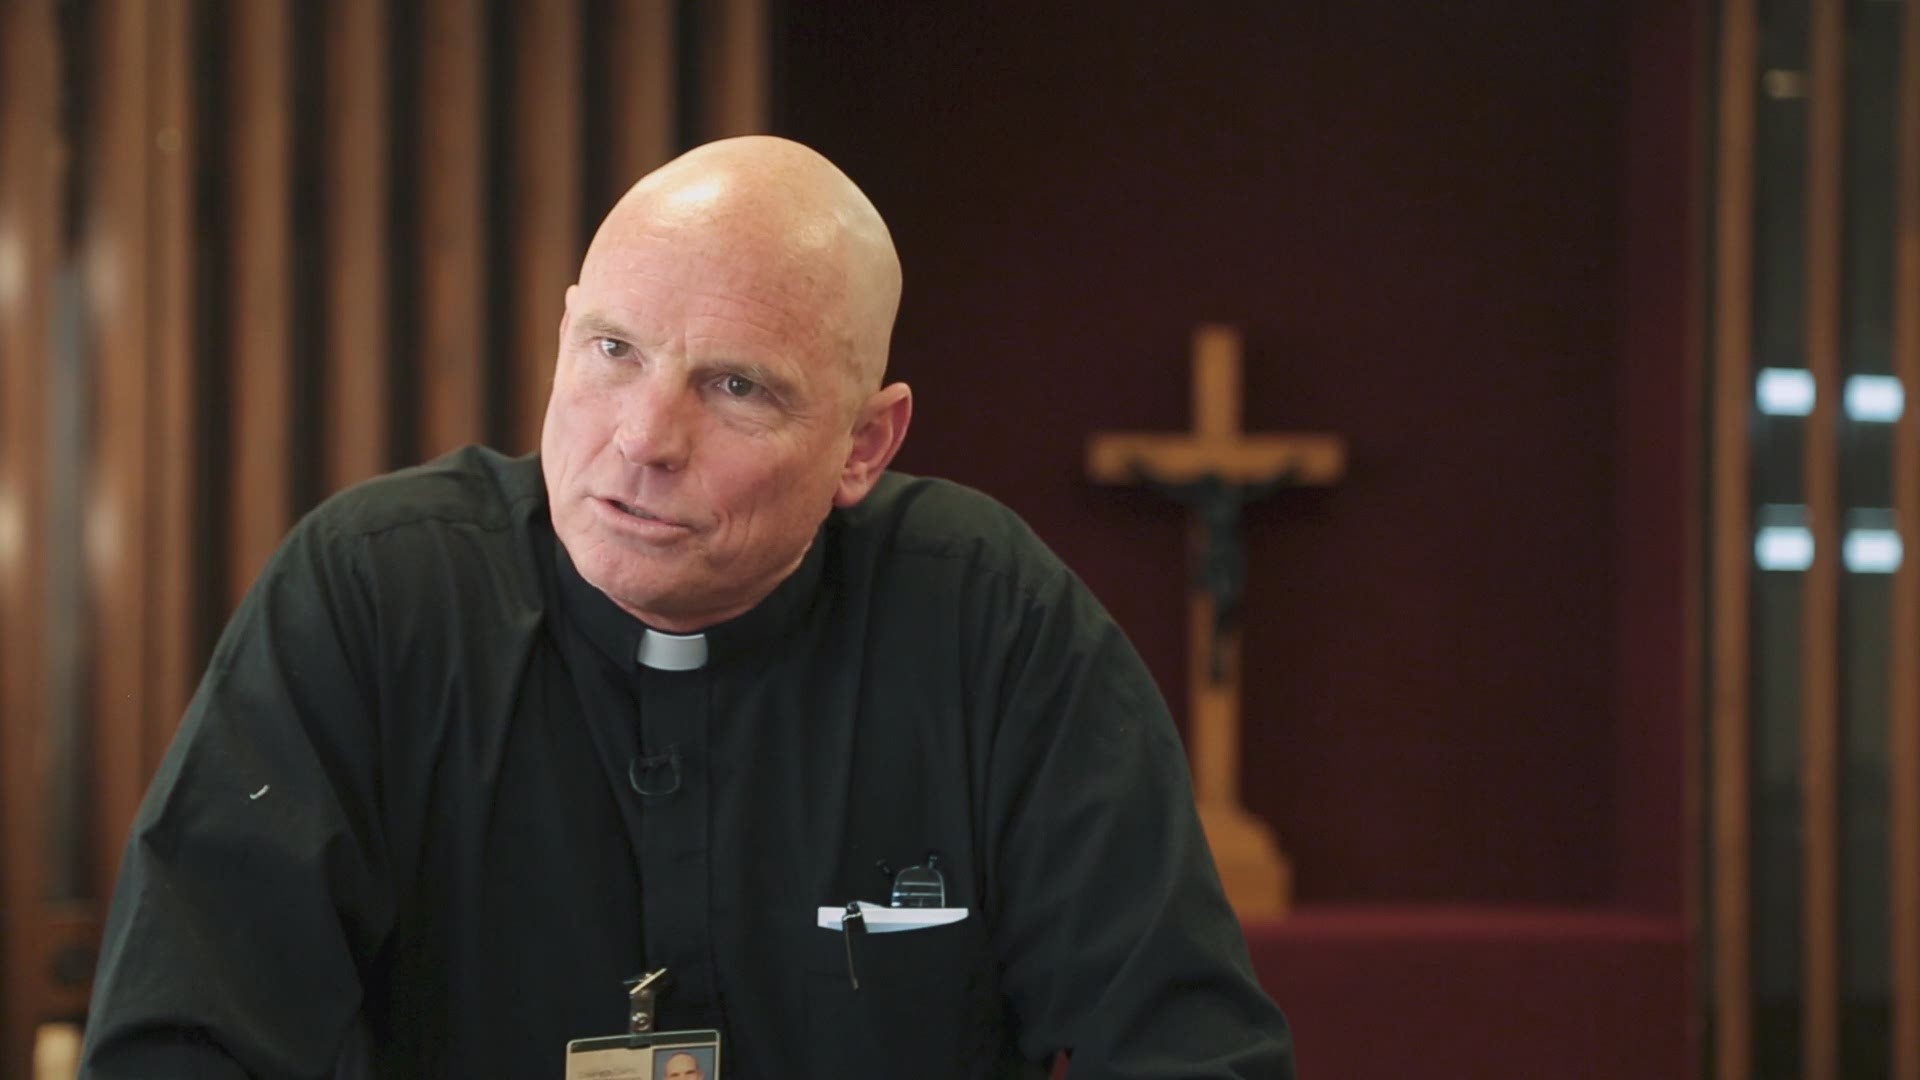 This Everyday Champion is changing the lives of the people he serves. Father Neil Walters has dedicated his life to serving others, including those who may need a little extra love, understanding and grace.